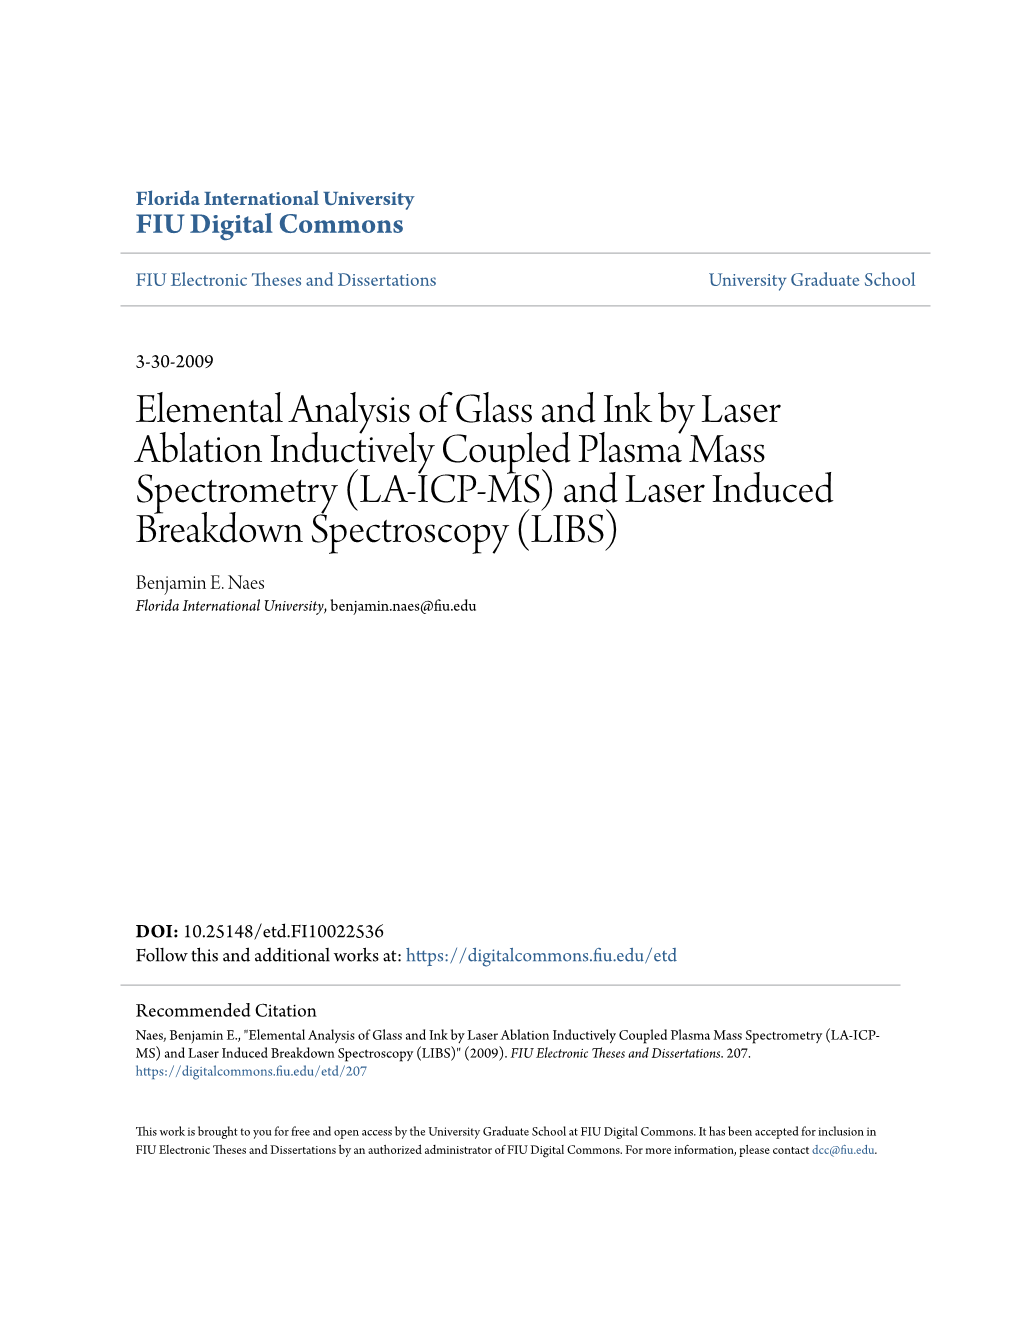 Elemental Analysis of Glass and Ink by Laser Ablation Inductively